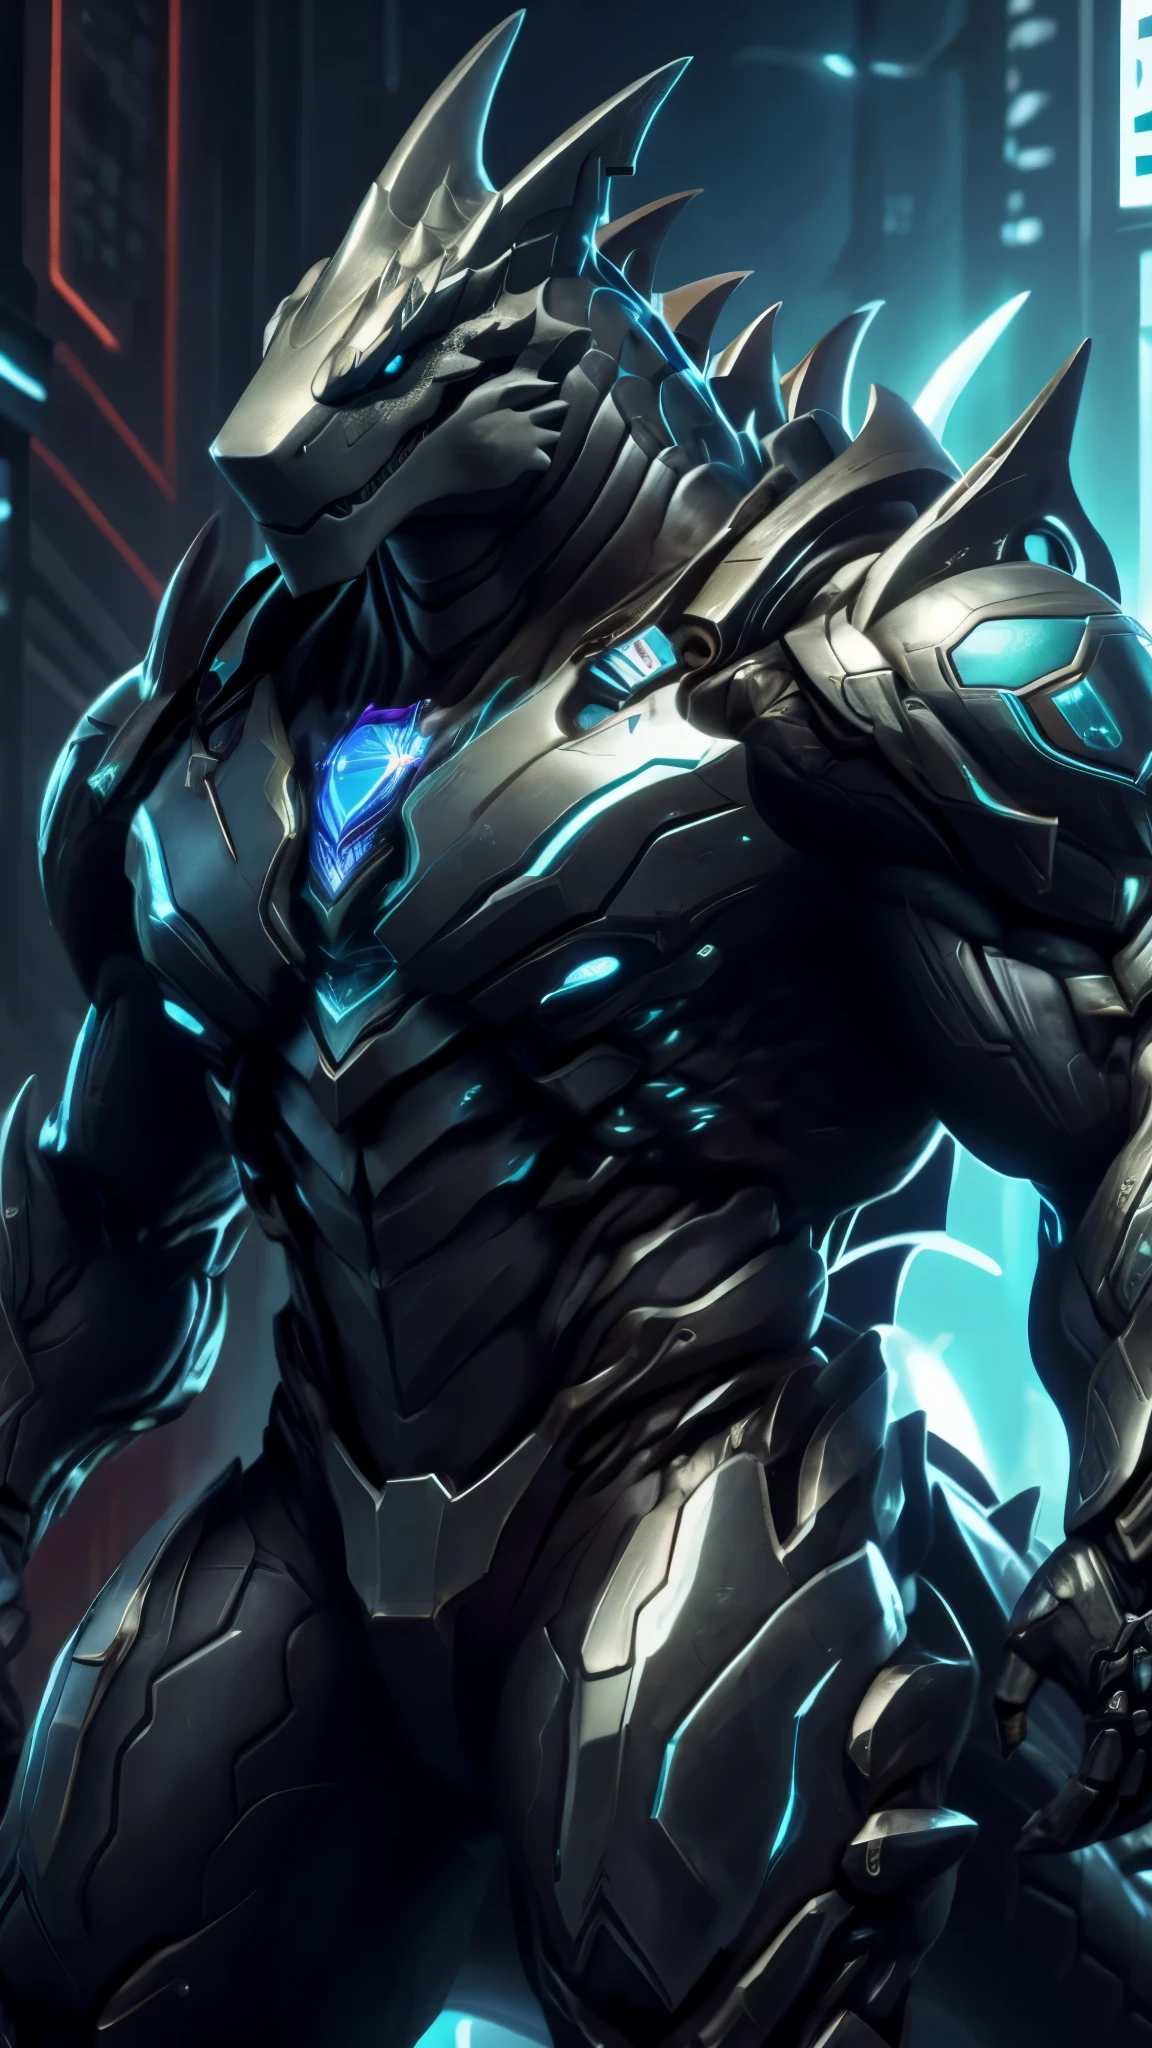 there is a shark with a large body and a large chest, muscular and terrifying, muscular!! sci-fi, sci - fi armour! muscular, cyborg shark portrait, guyver style, guyver dark hero, full body, wearing a black full bodysuit, close-up shot, as a badass monster hunter, muscular proporcional arms, jormungandr, godzilla portrait, lizardman art, full body, raptor like legs